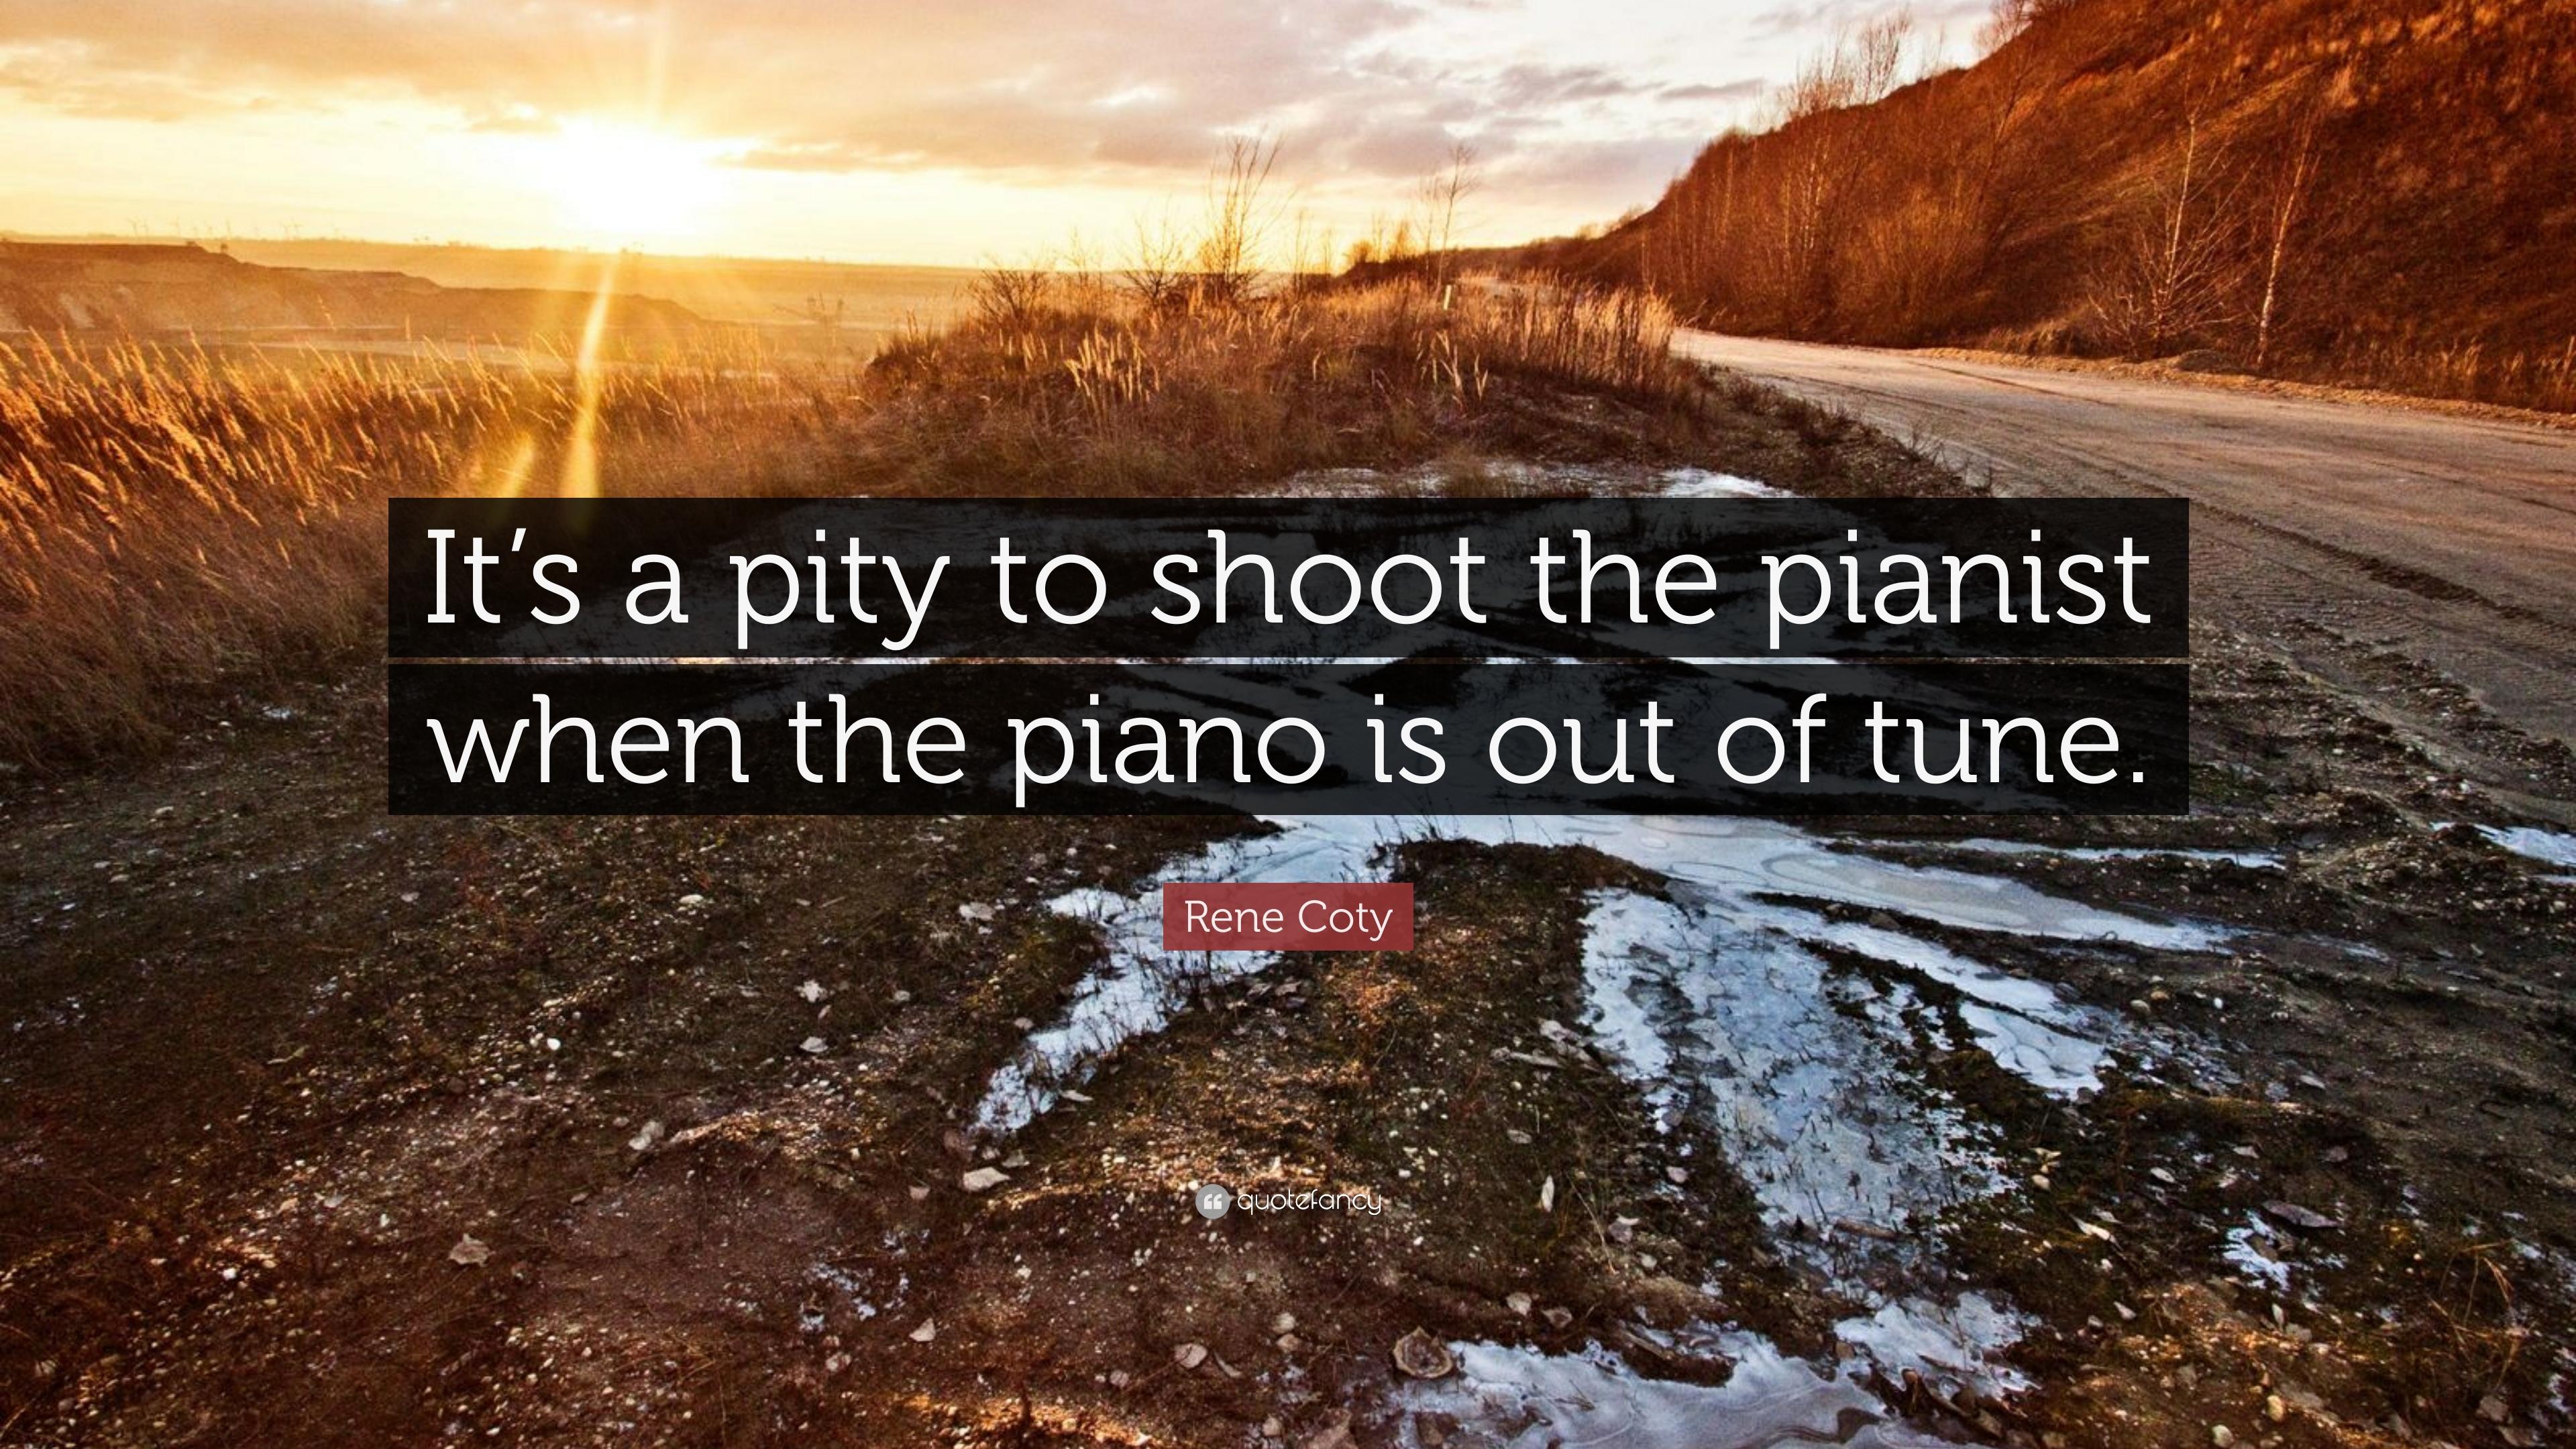 Rene Coty Quote: “It's a pity to shoot the pianist when the piano is